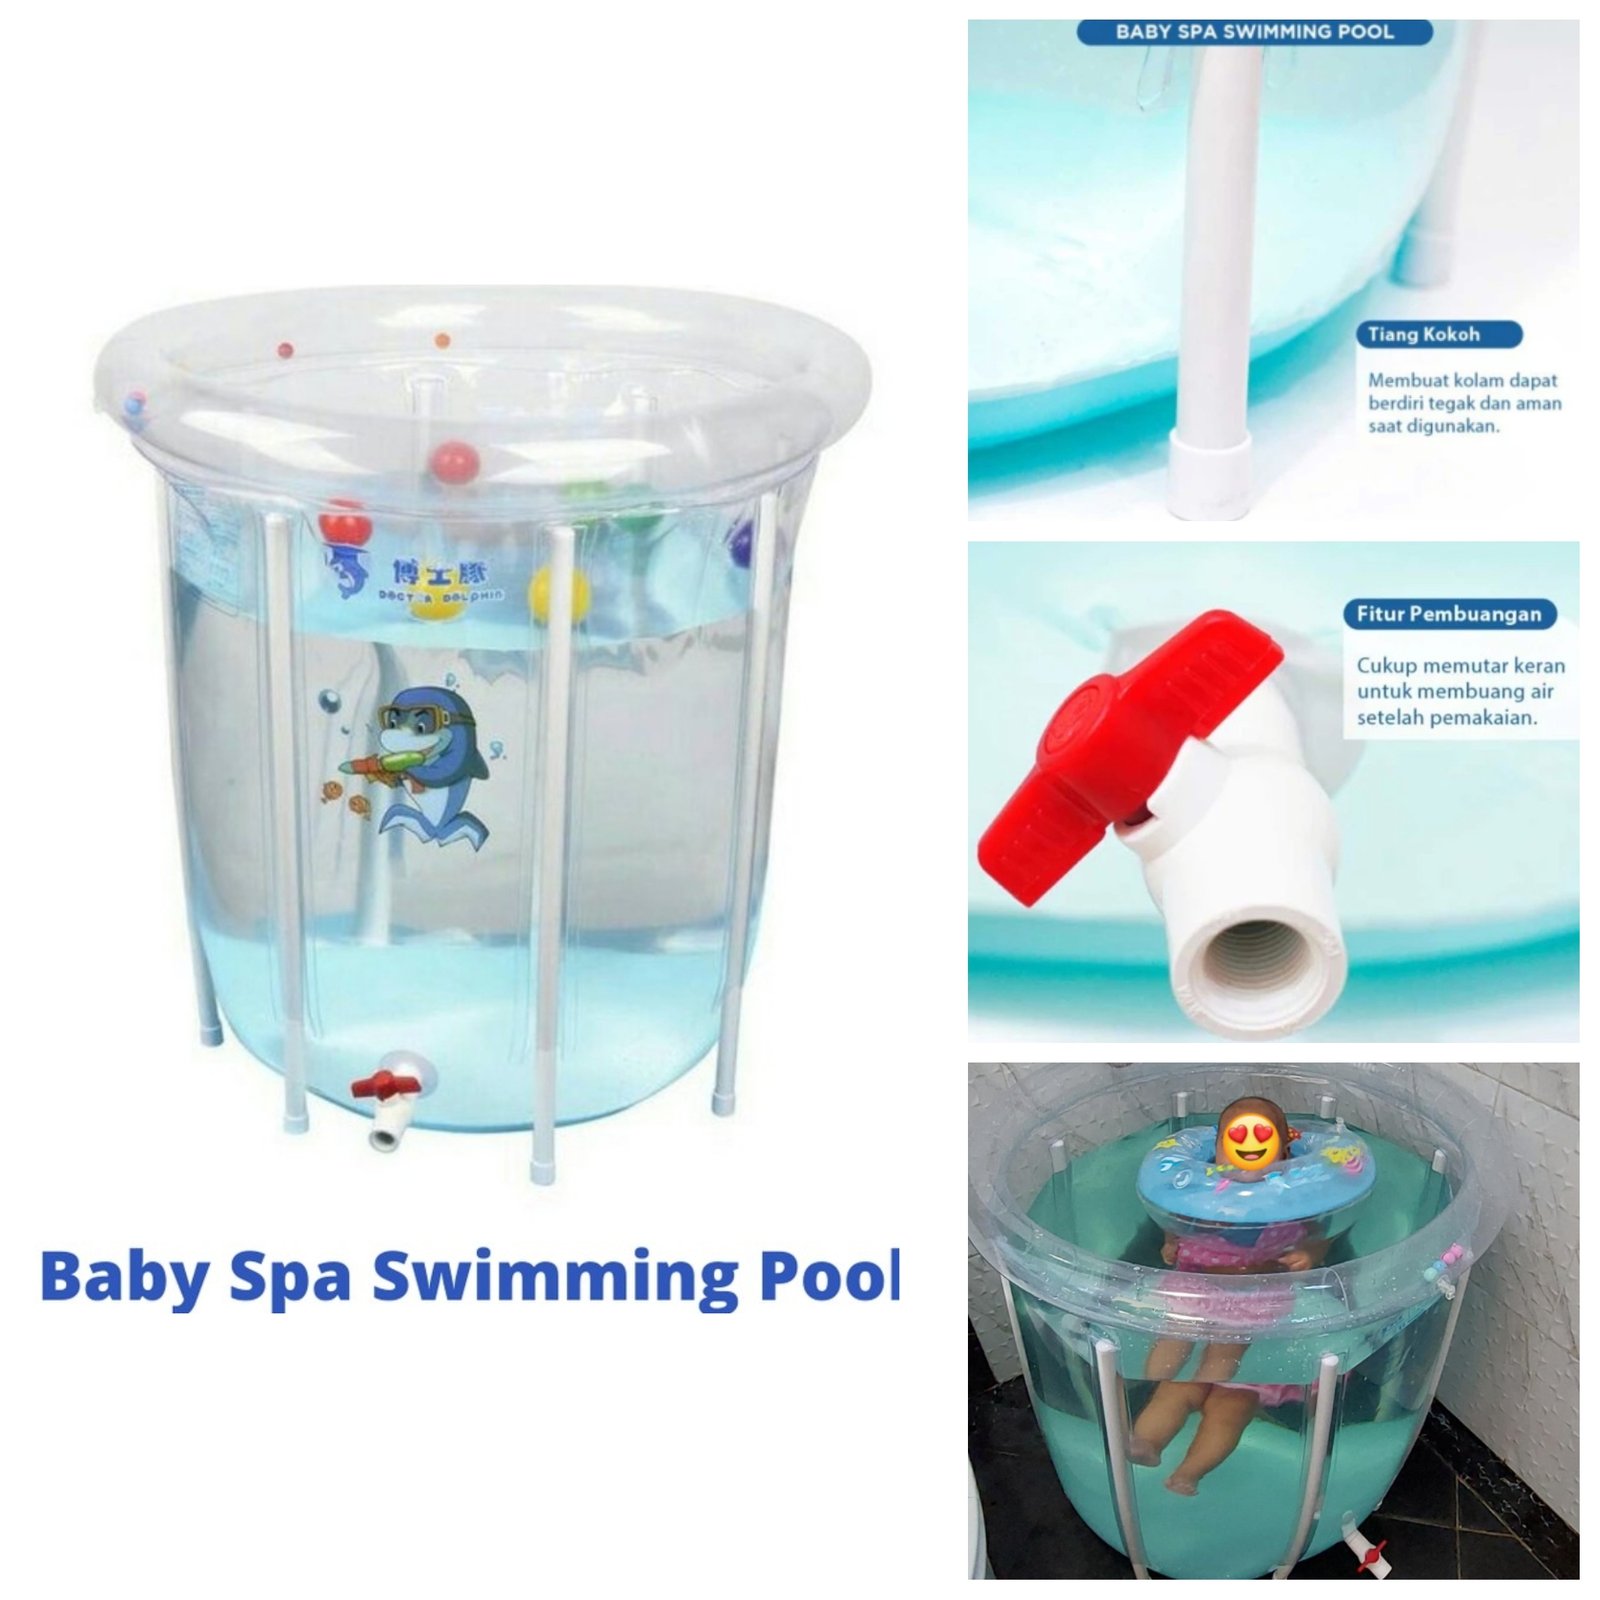 BABY SPA SWIMMING POOL DOLPHIN (INCLUDE NECK RING)